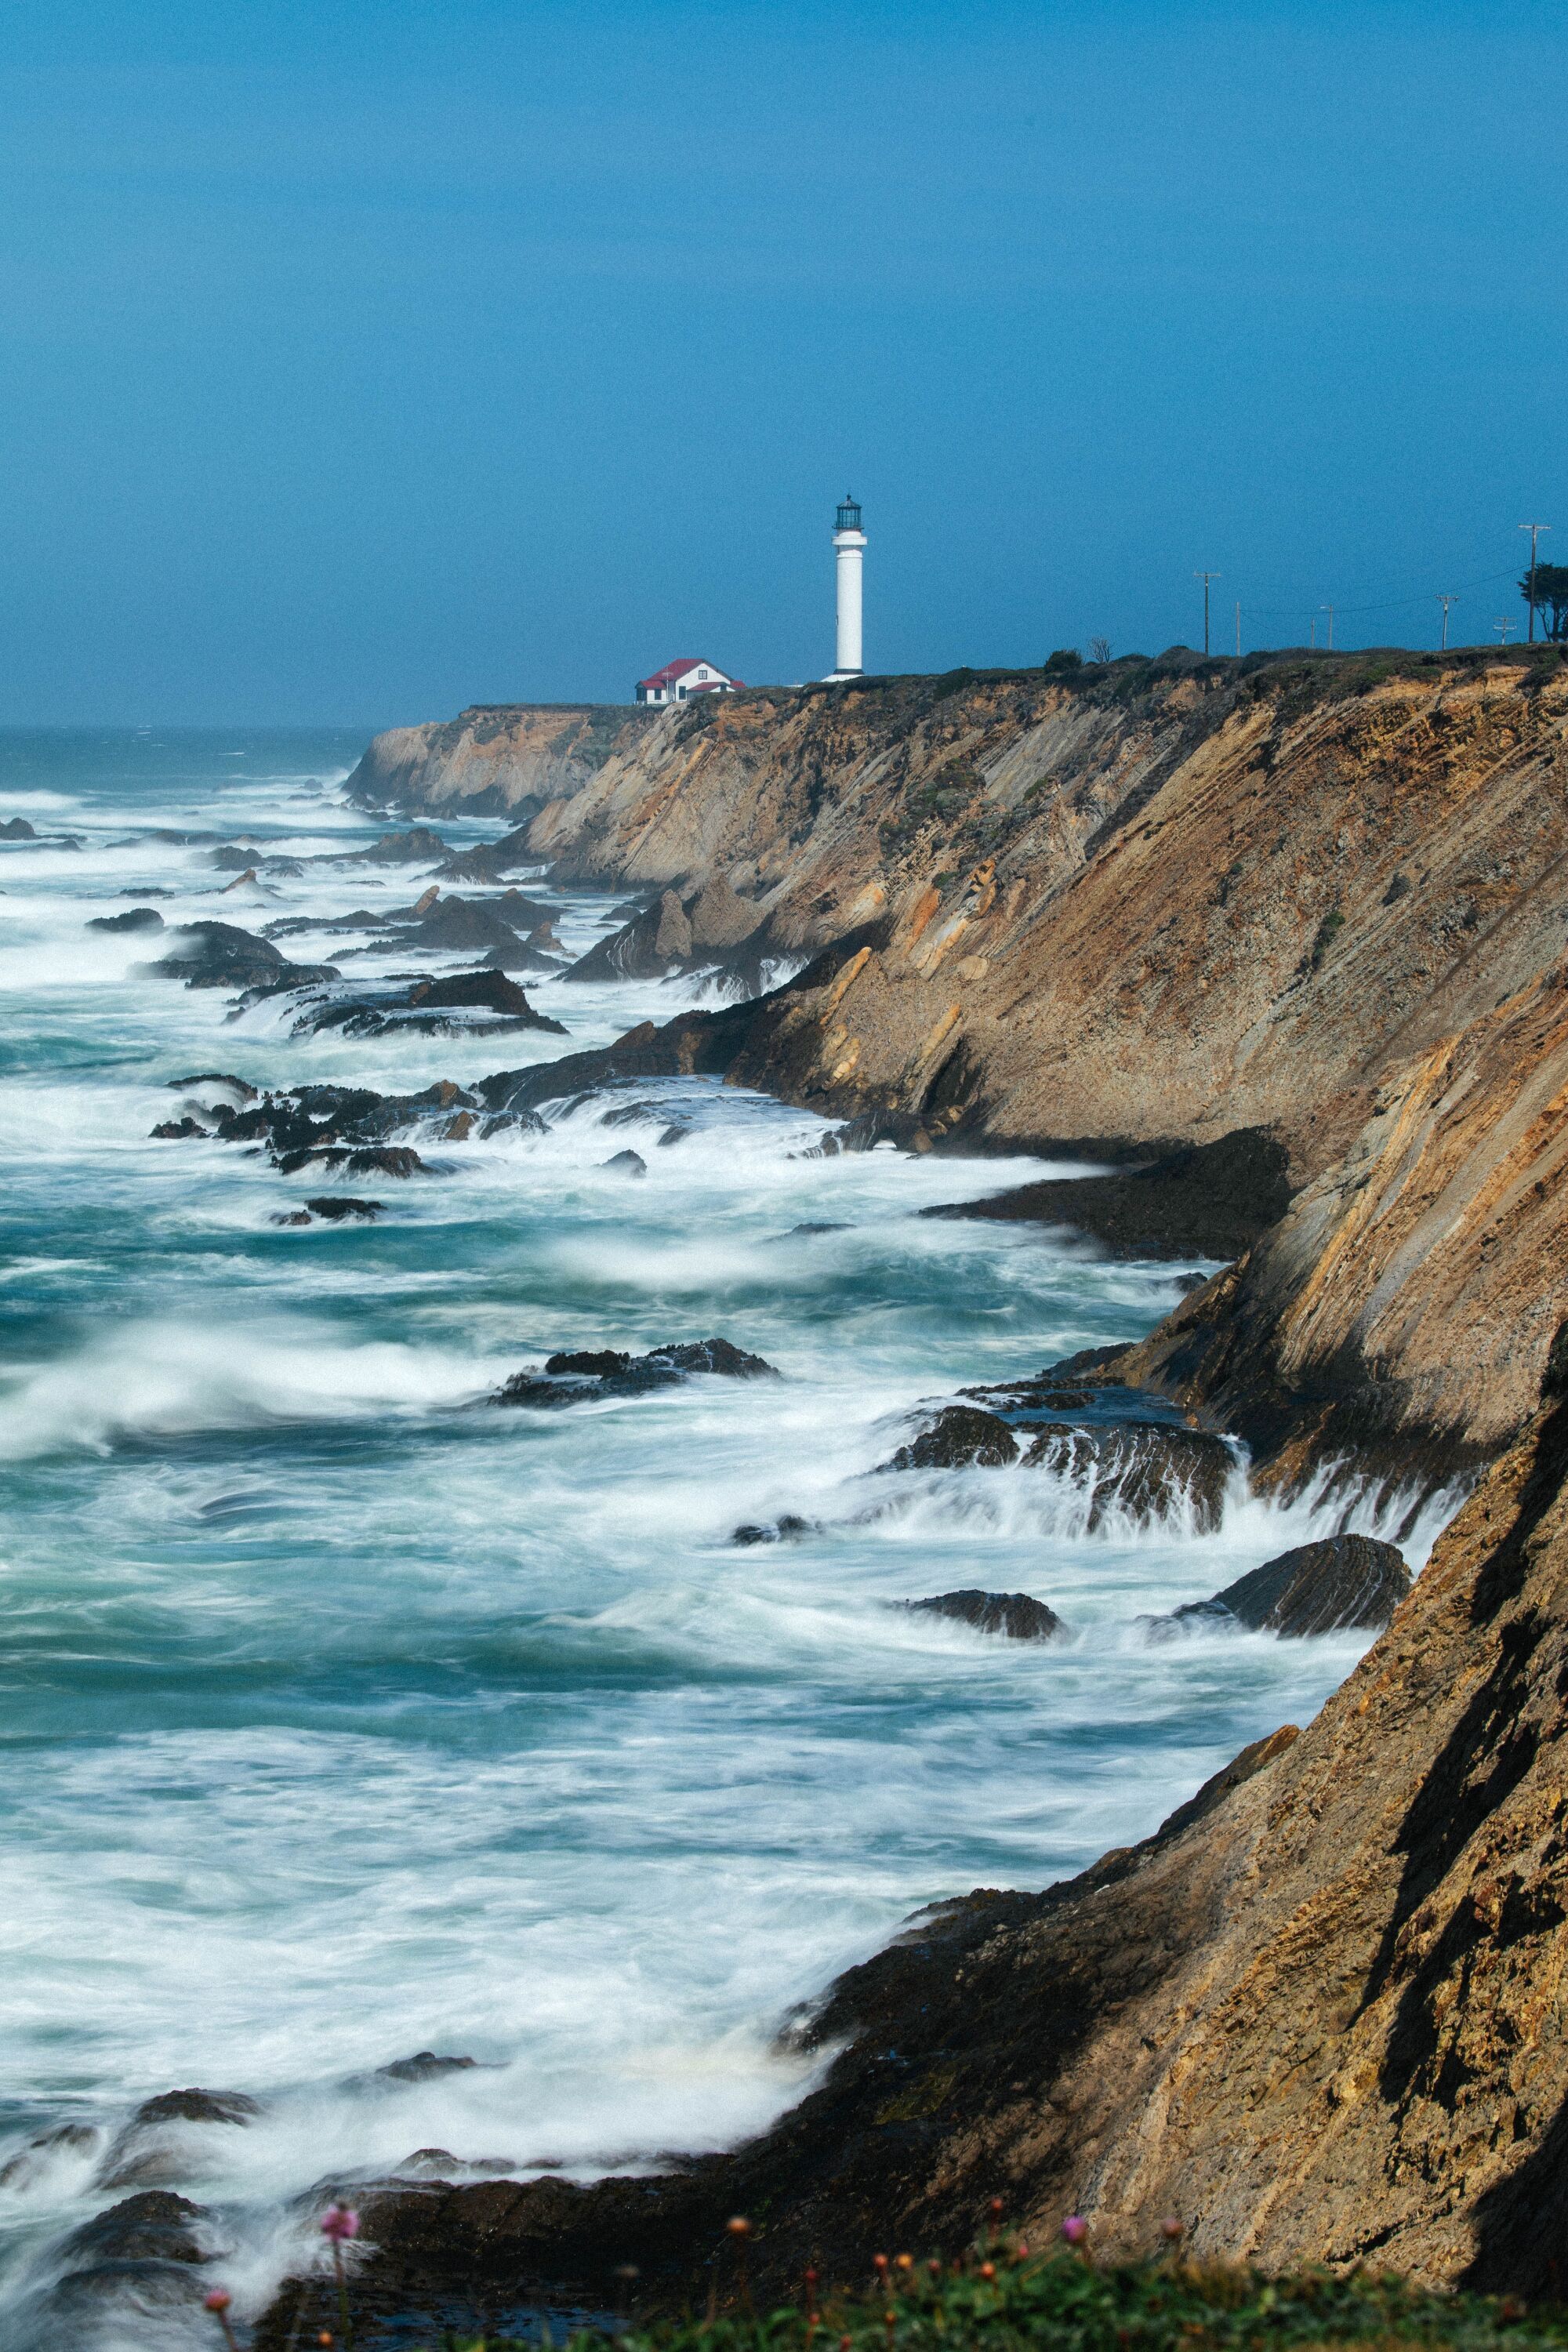 The Point Arena Lighthouse stands in the distance above a rocky seashore.